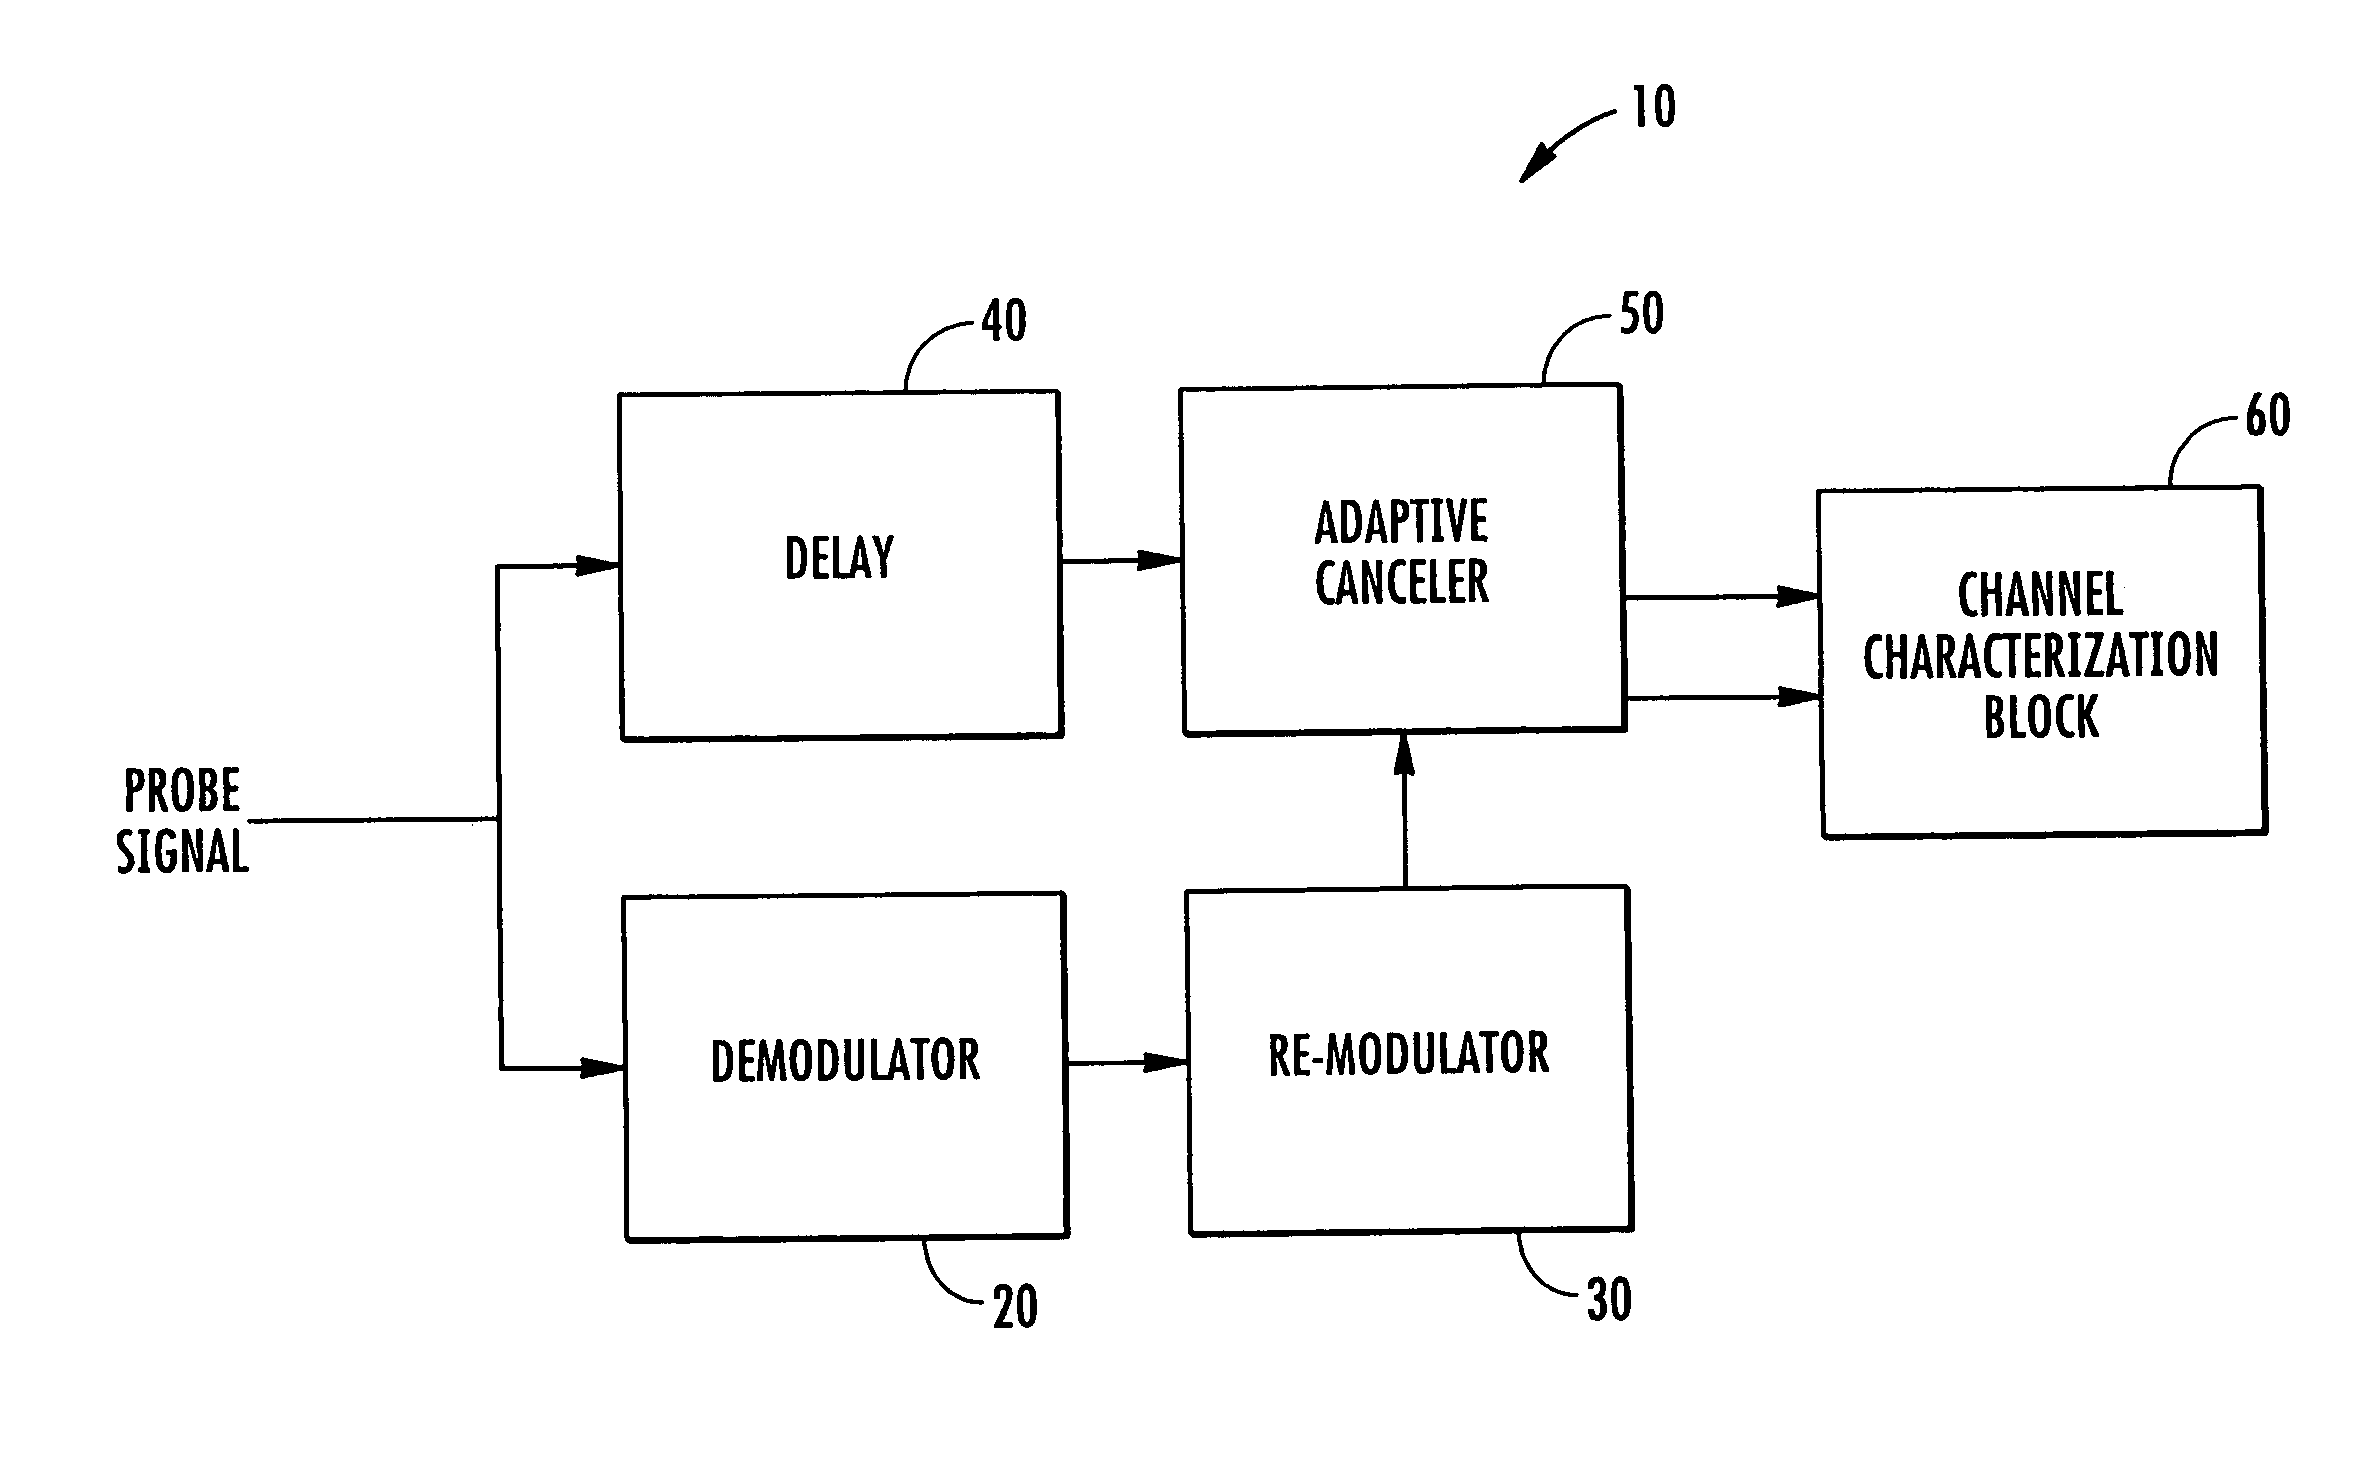 Communications channel characterization device and associated methods